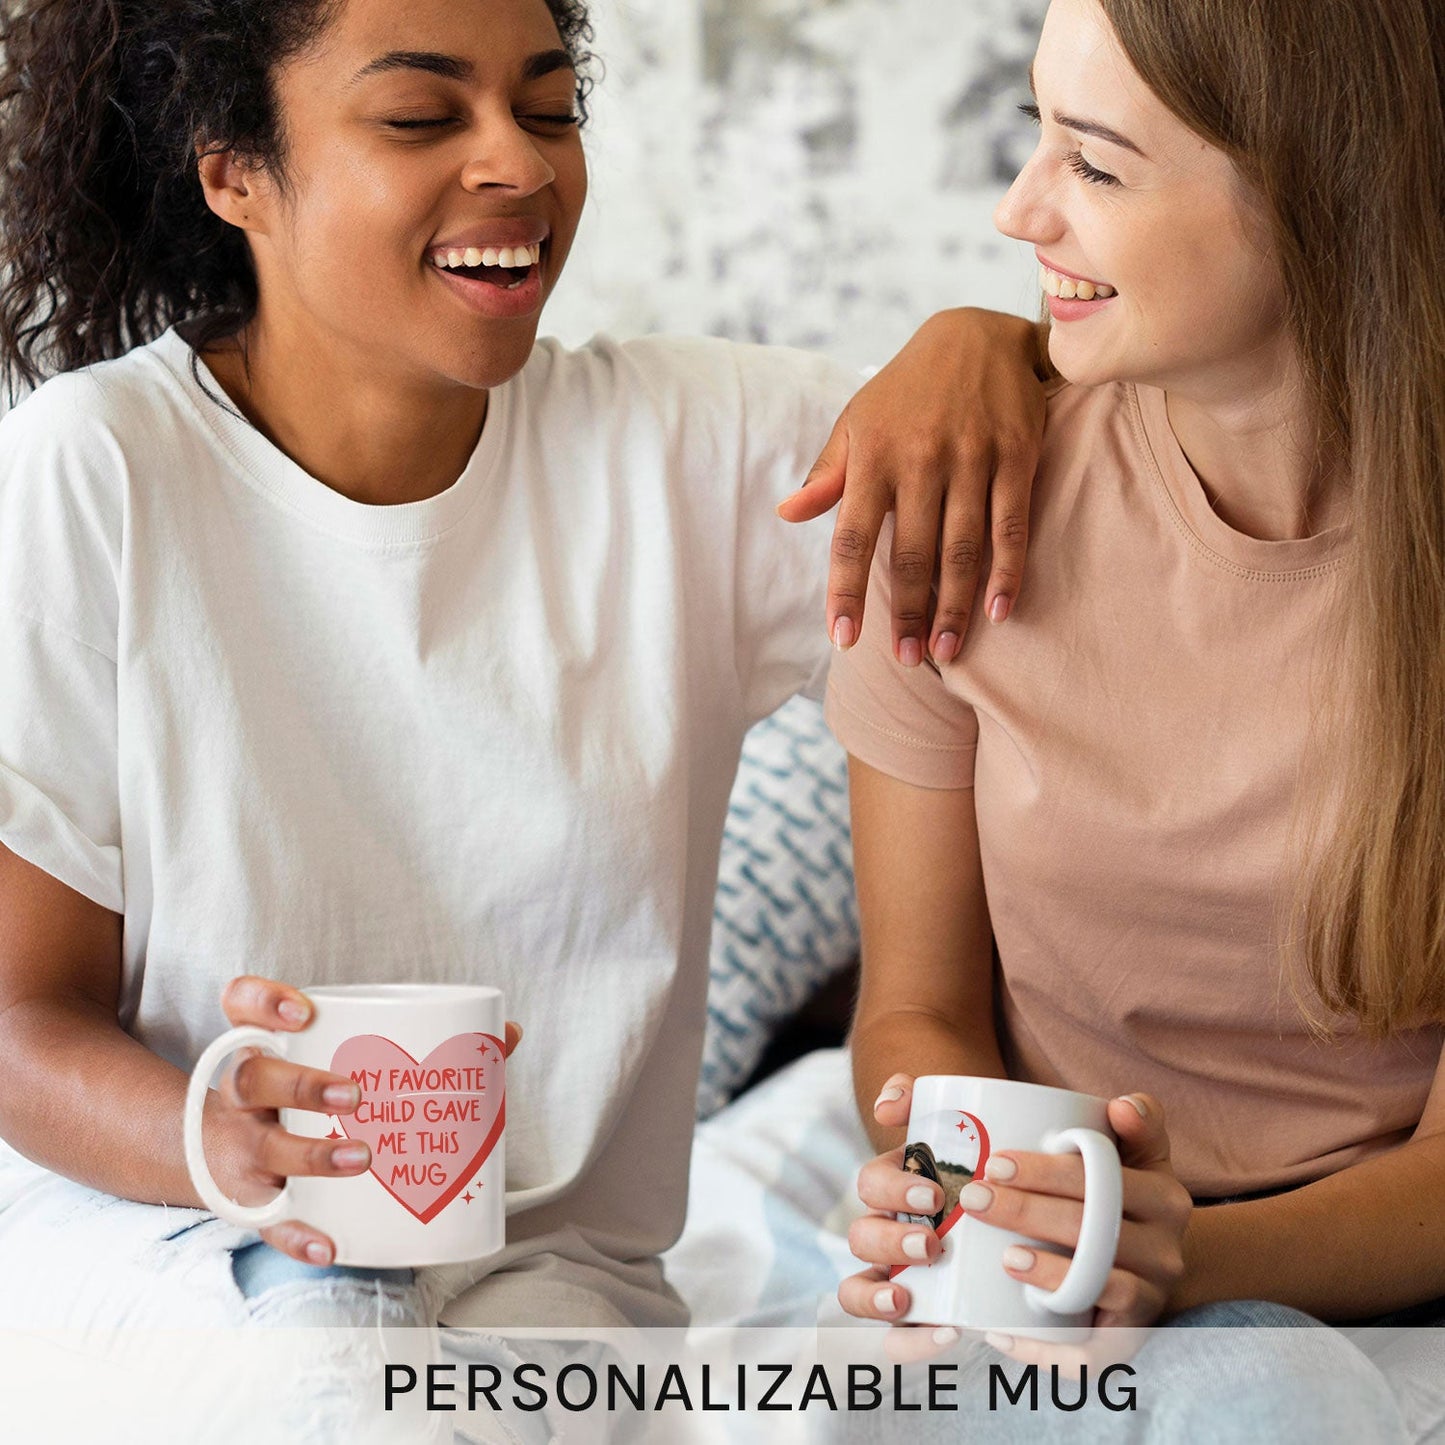 My Favorite Child Gave Me This Mug - Personalized Birthday gift For Parents From Children - Custom Mug - MyMindfulGifts